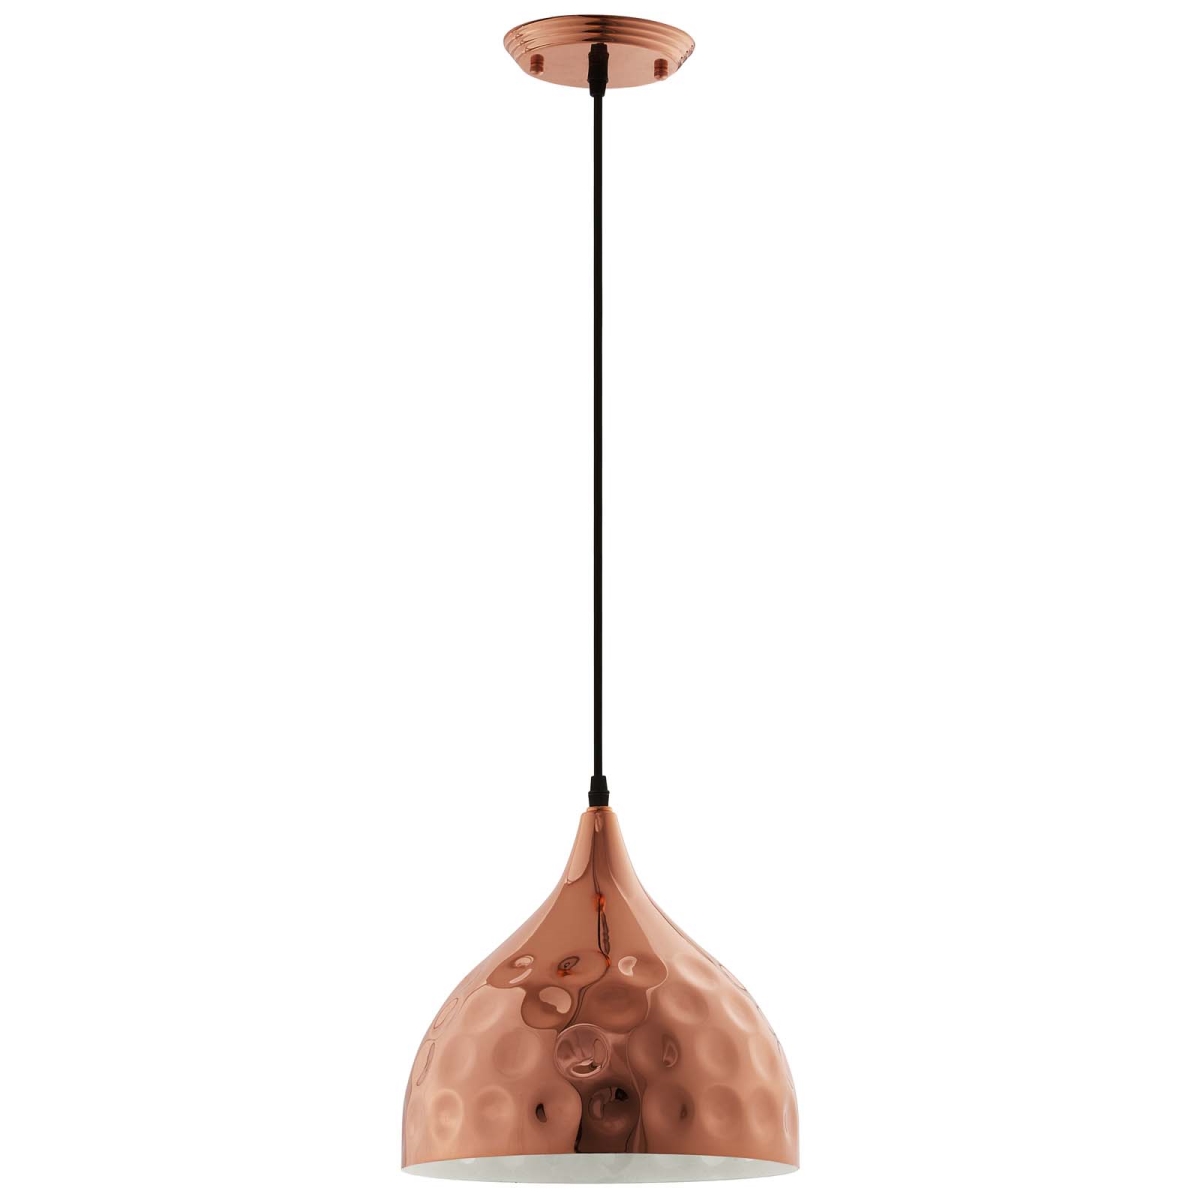 Eei-2904 Dimple 11 In. Bell-shaped Rose Gold Pendant Light , 78.5 X 11 X 11 In.